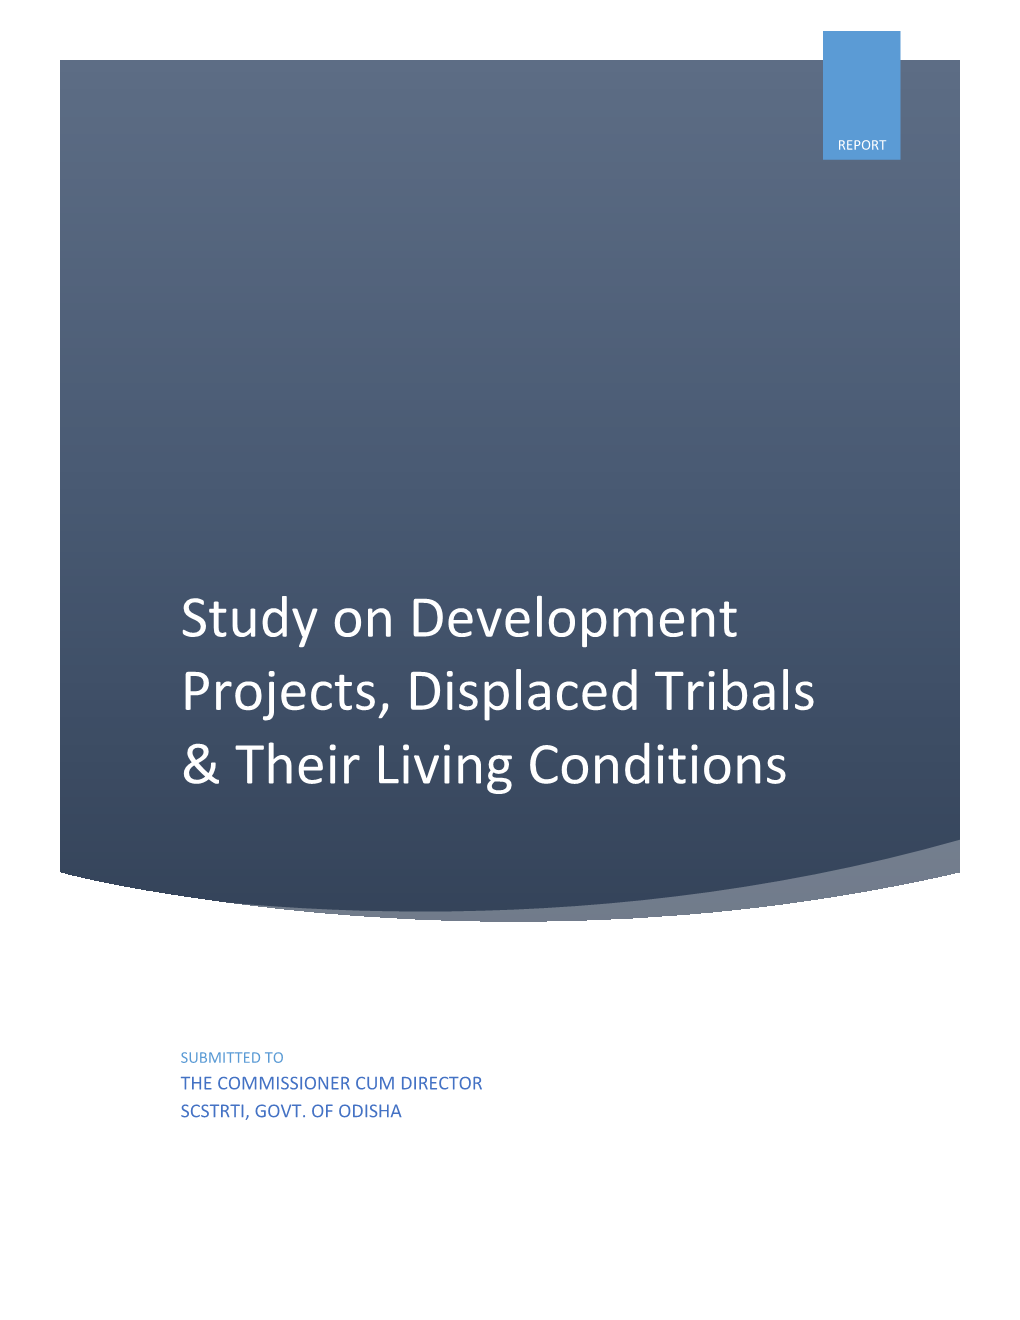 Study on Development Projects, Displaced Tribals & Their Living